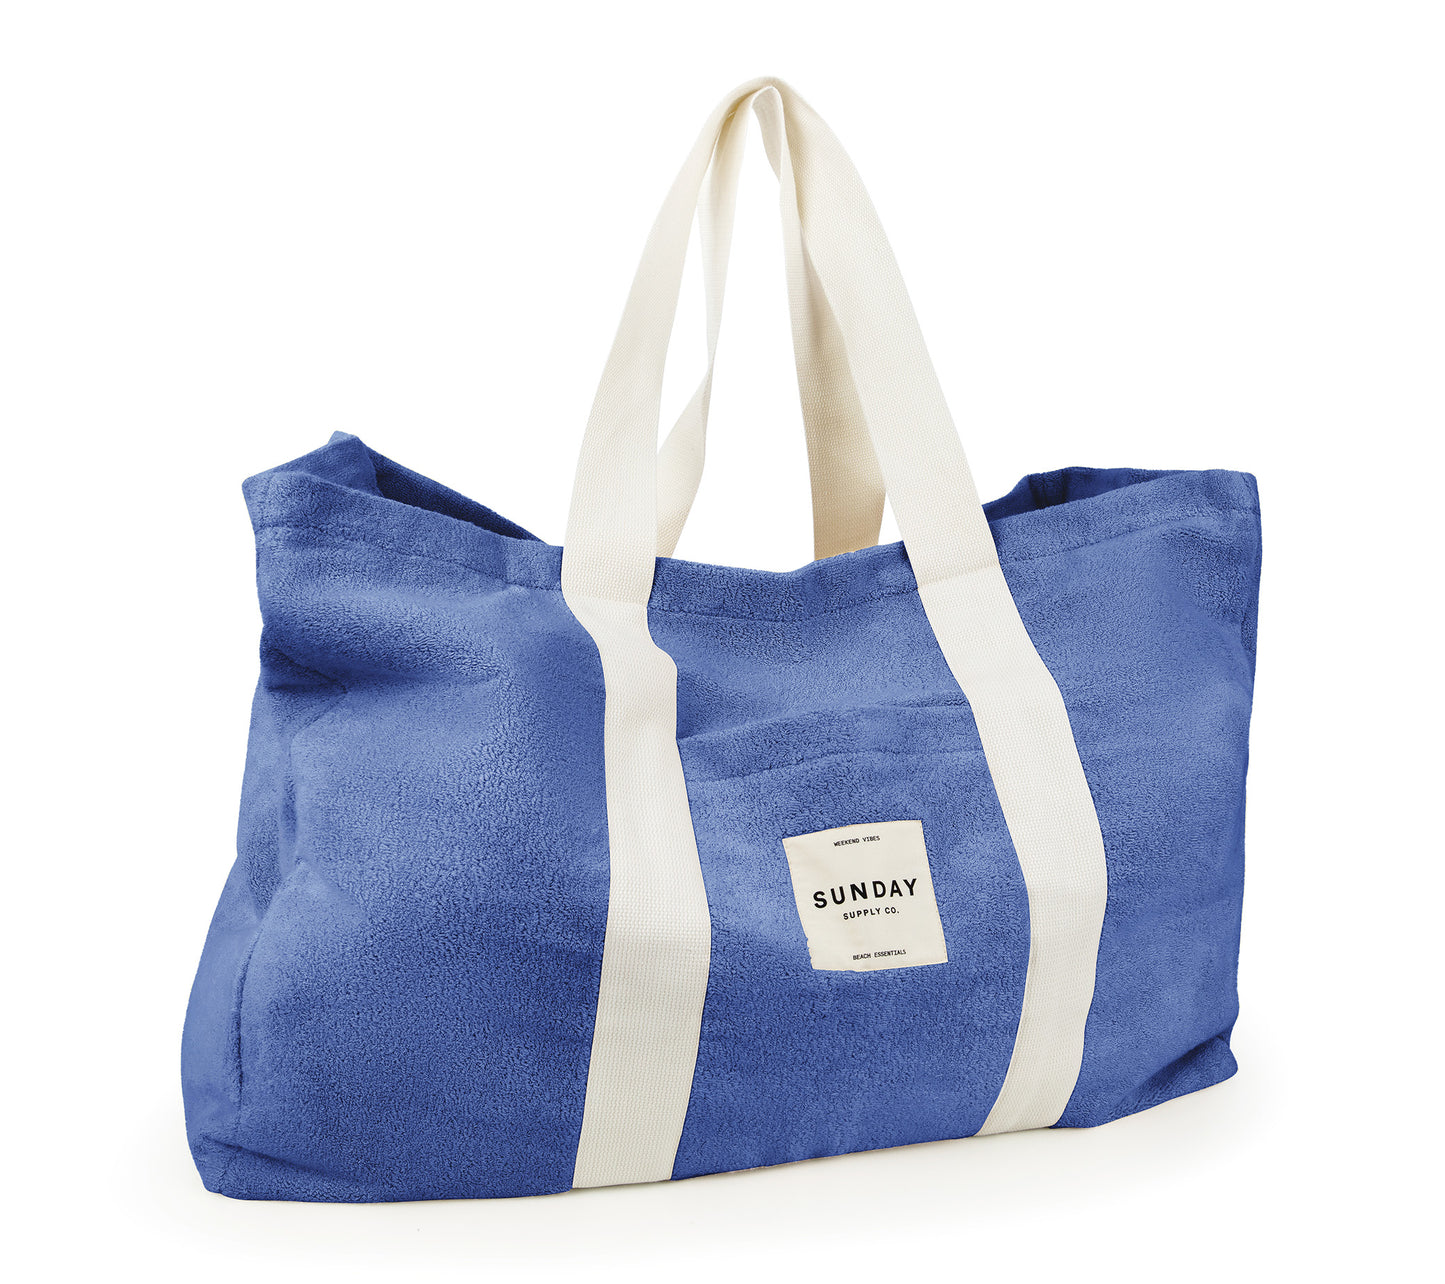 Pacific Towelling Beach Bag